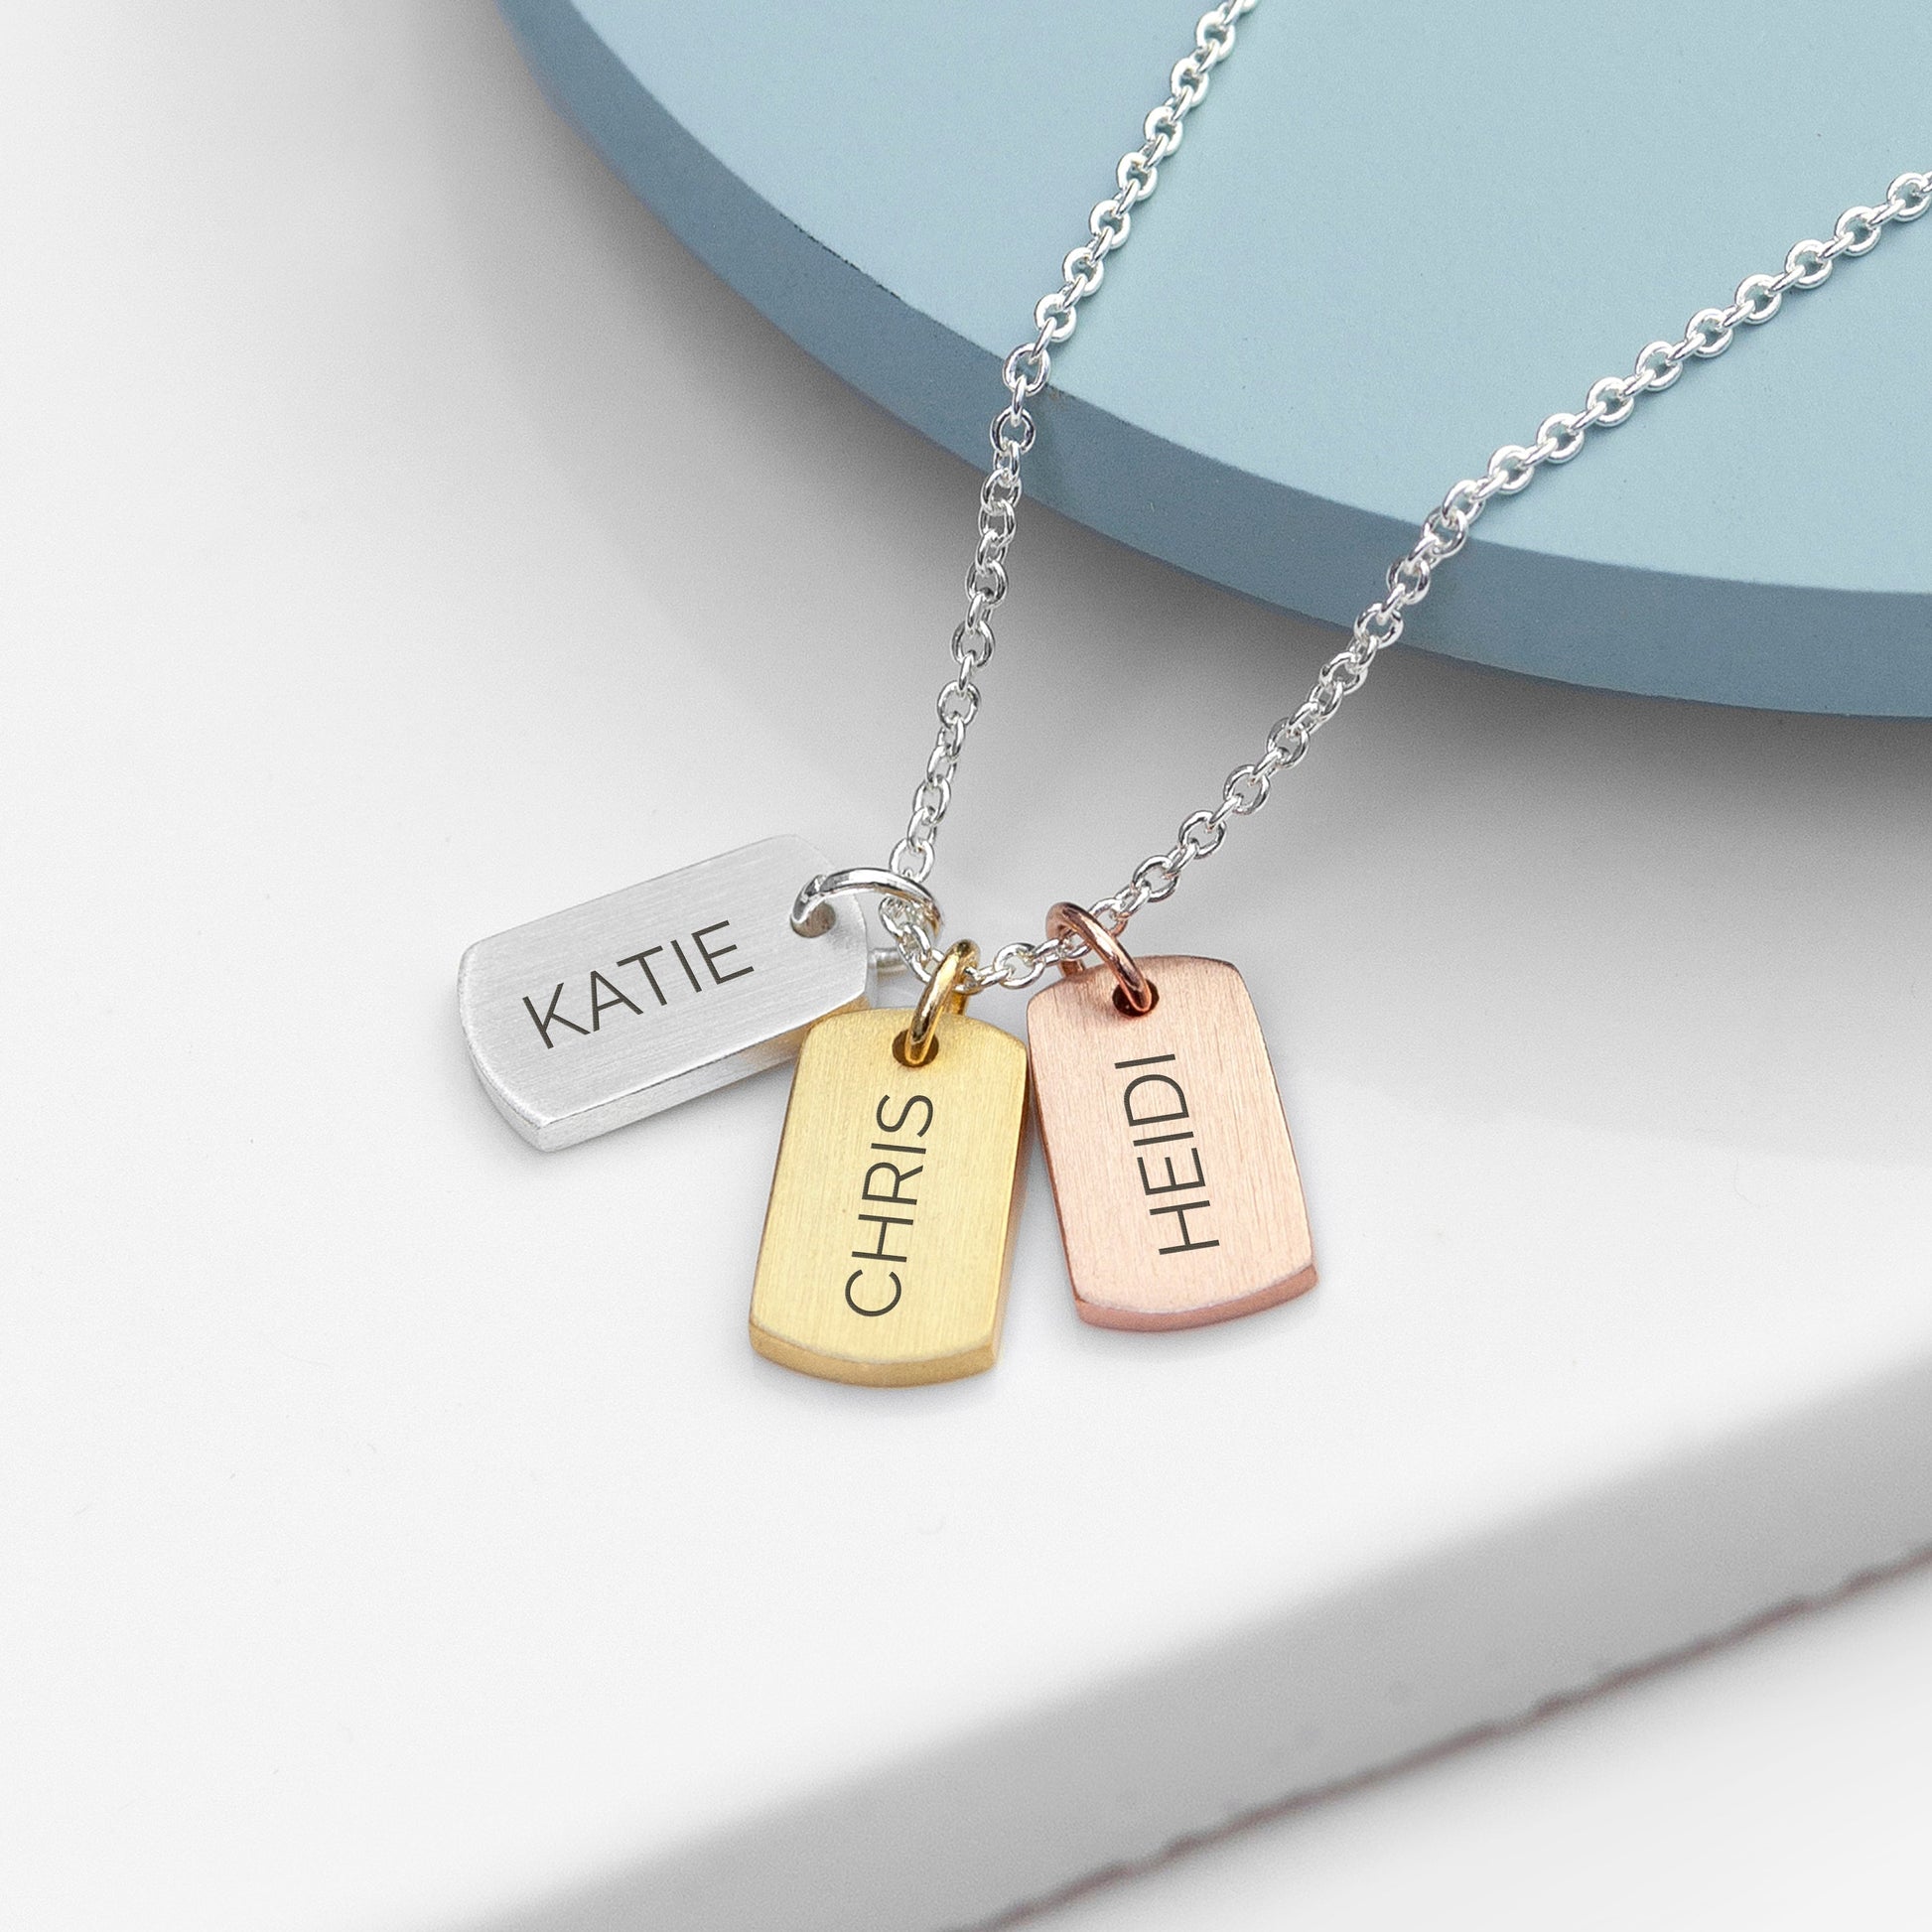 Personalized Necklaces - Personalized 3-tag Family Name Necklace 